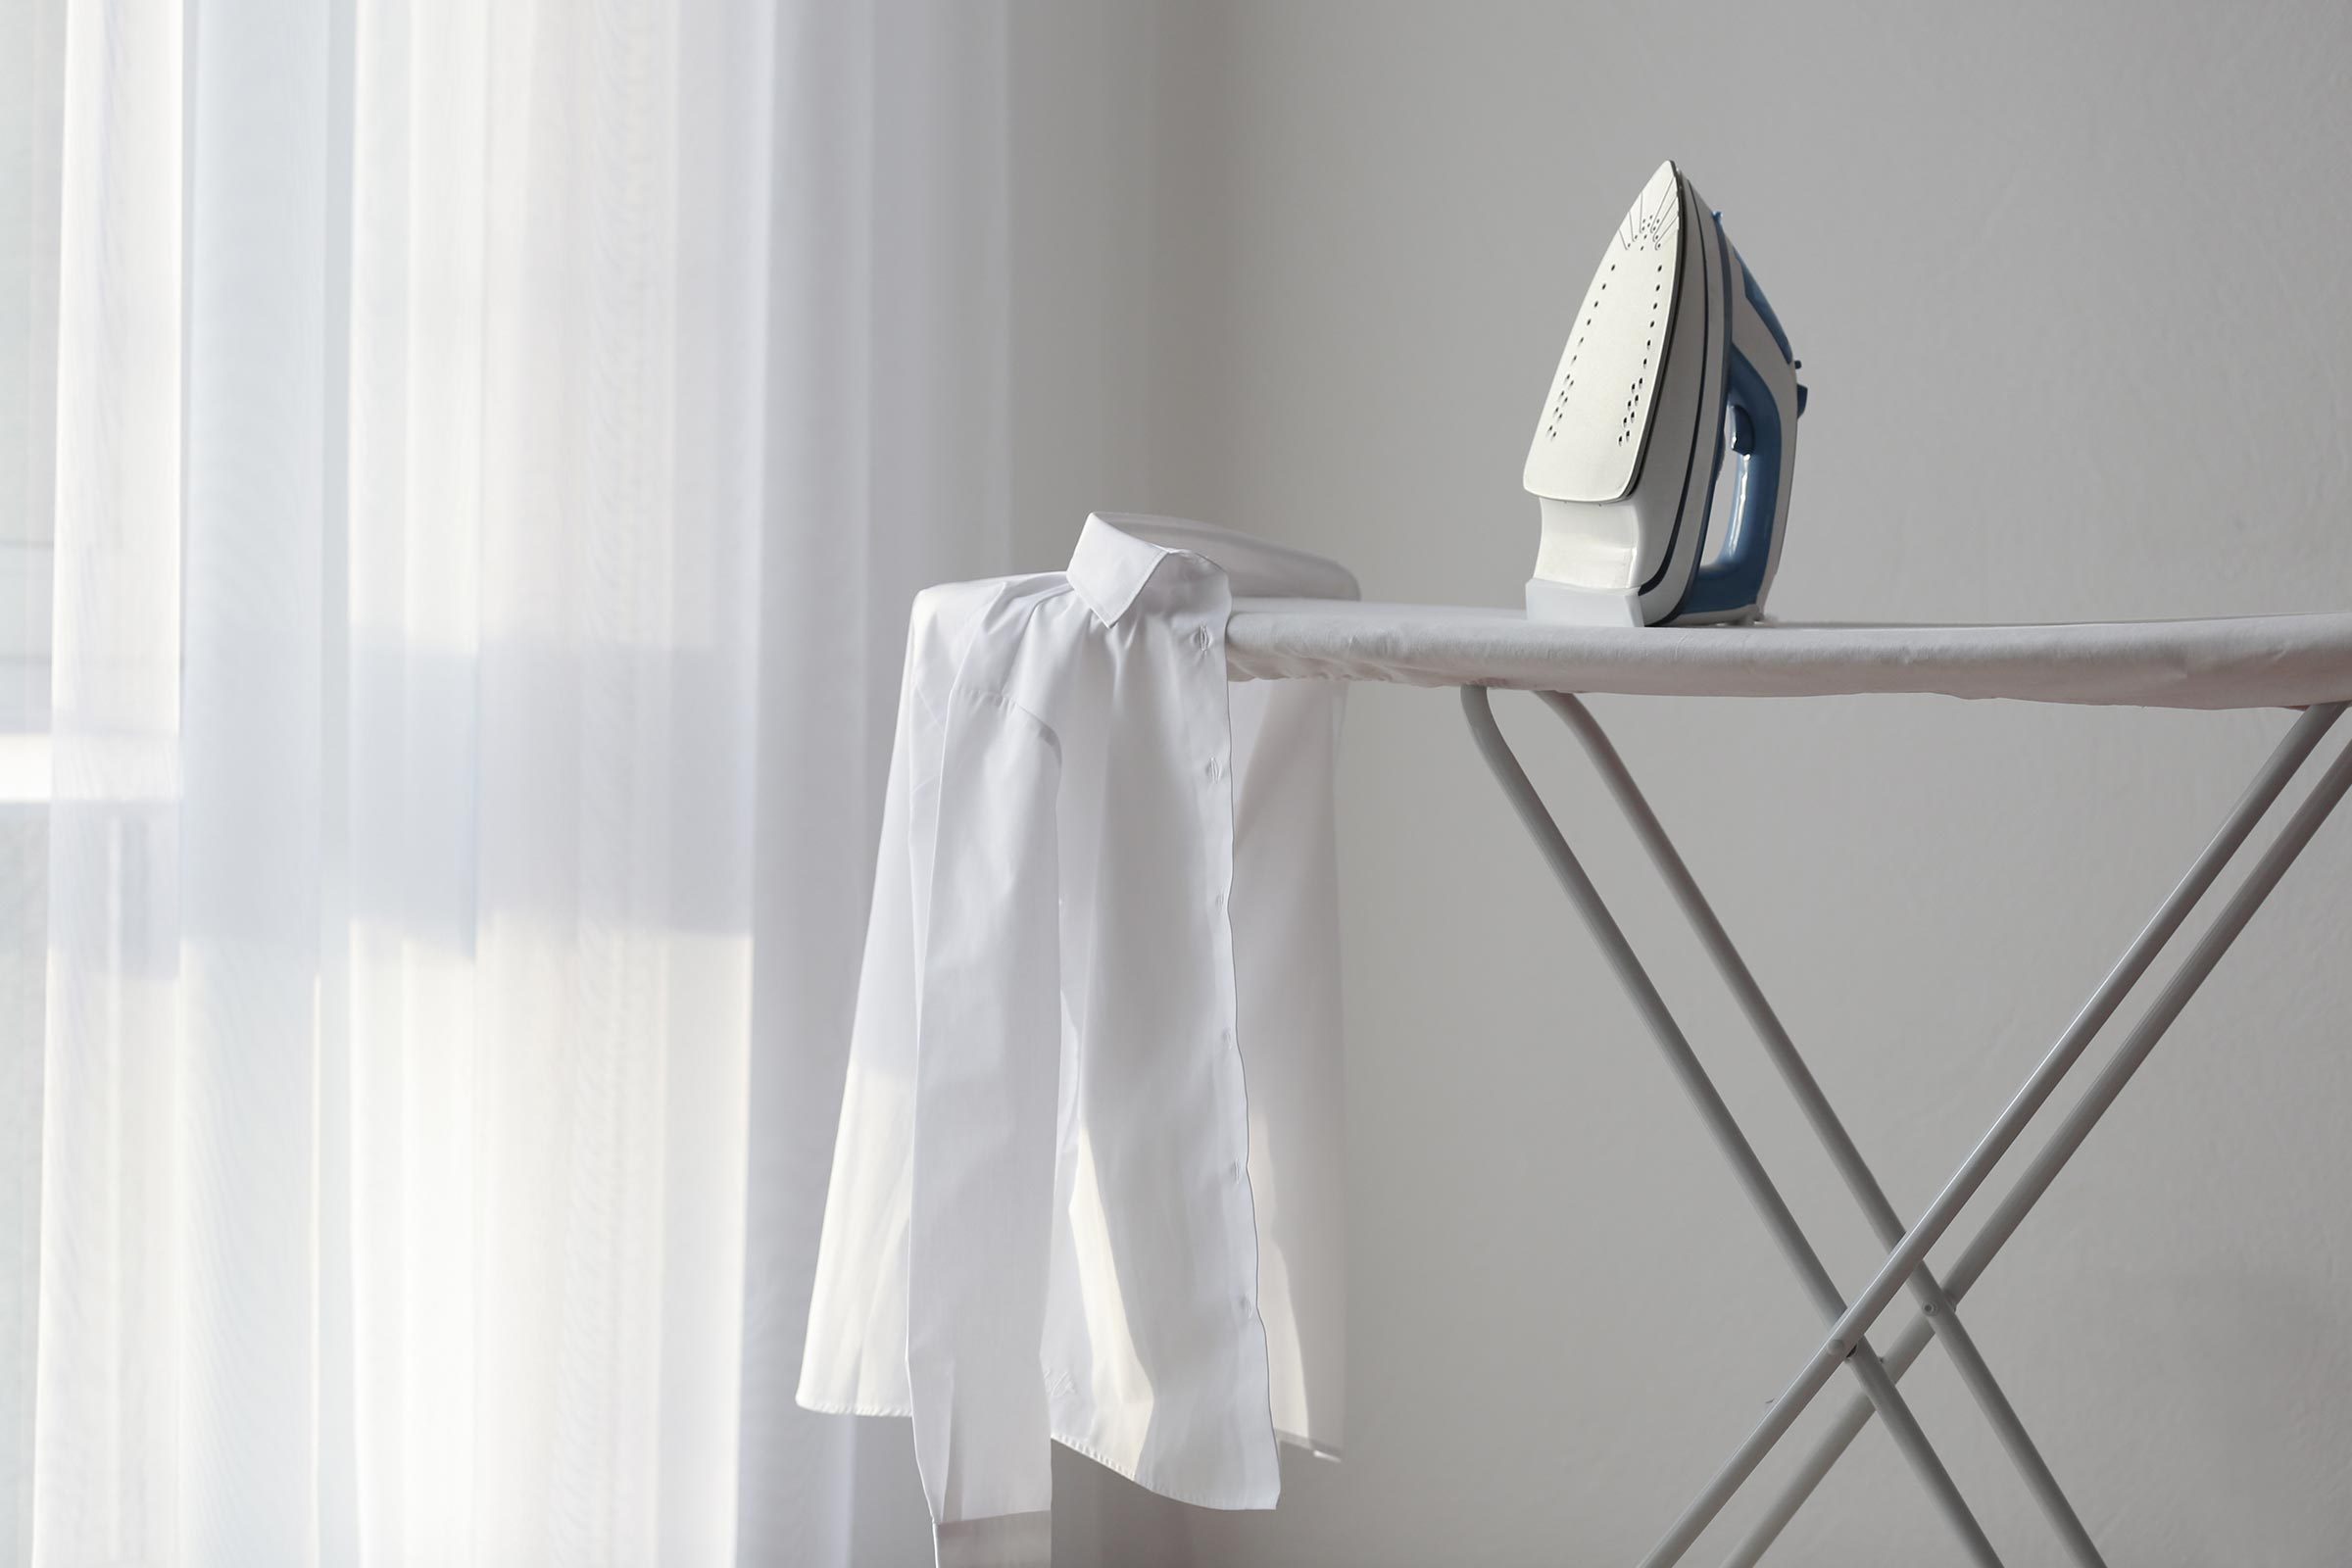 How to Iron Different Fabrics - Fabric Care